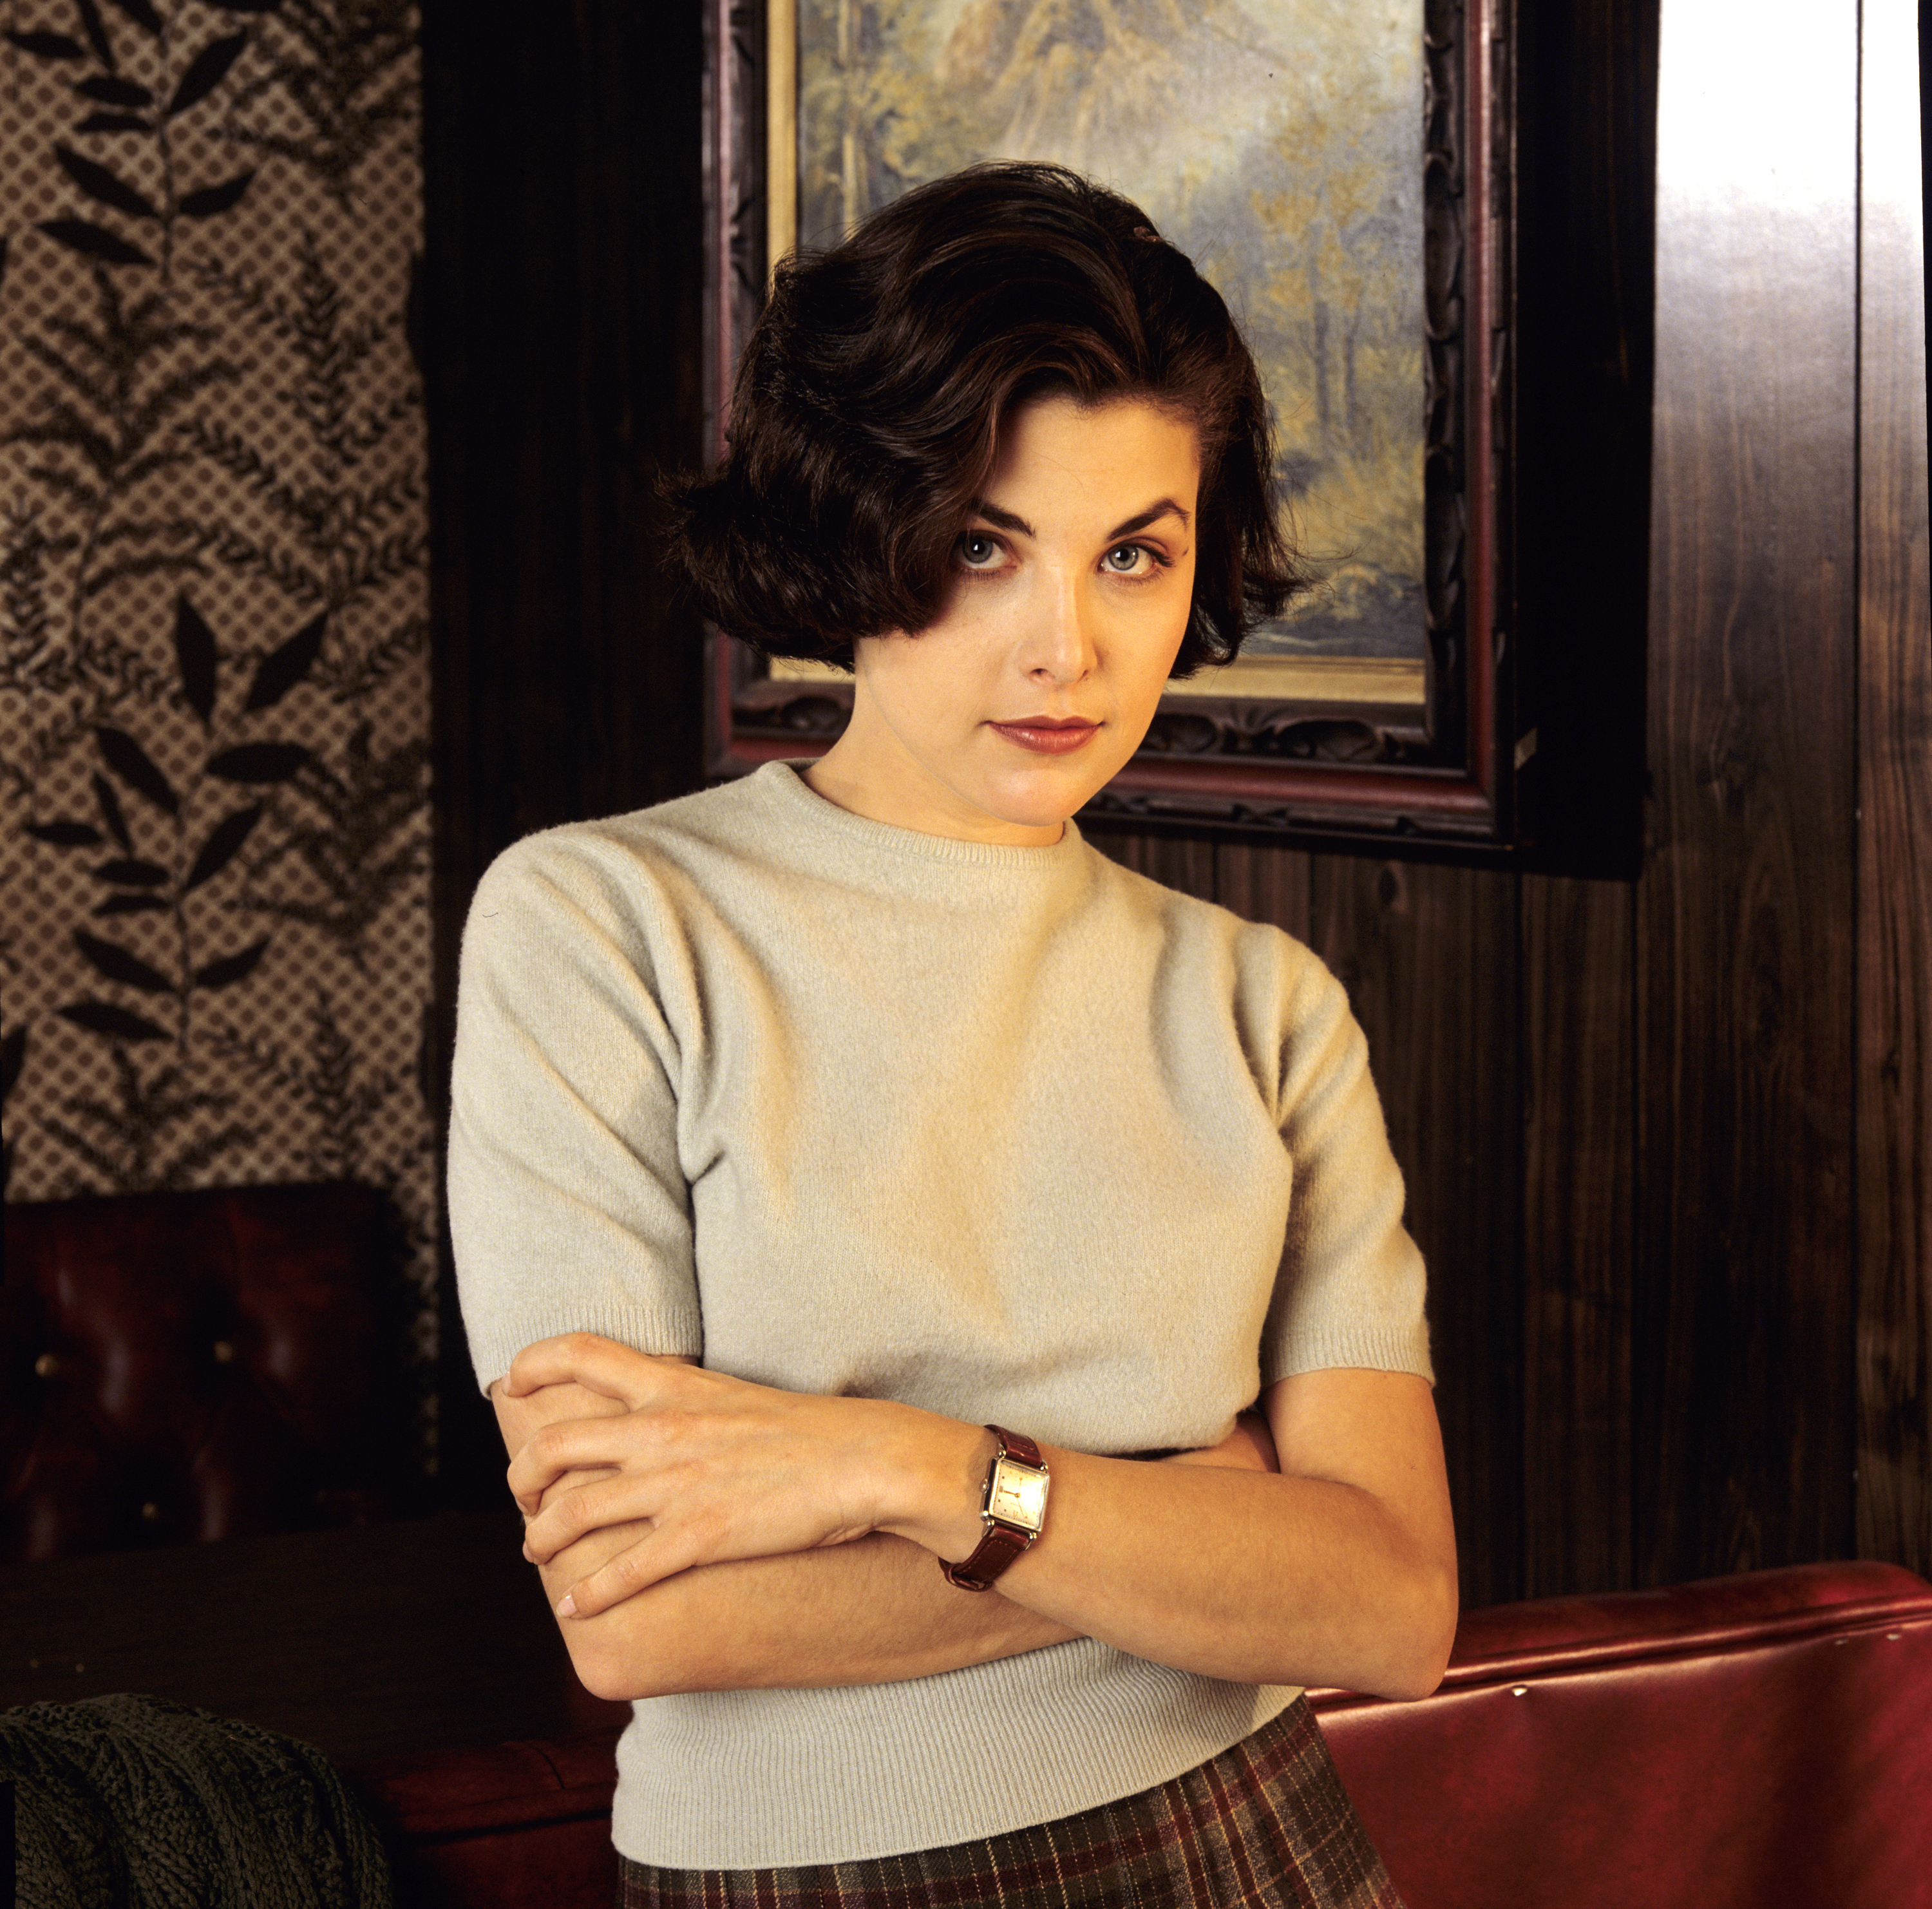 Actress Sherilyn Fenn who played Audrey Horne on the television show 'Twin Peaks' on Nov. 20, 1989. (ABC Photo Archives/Getty Images)